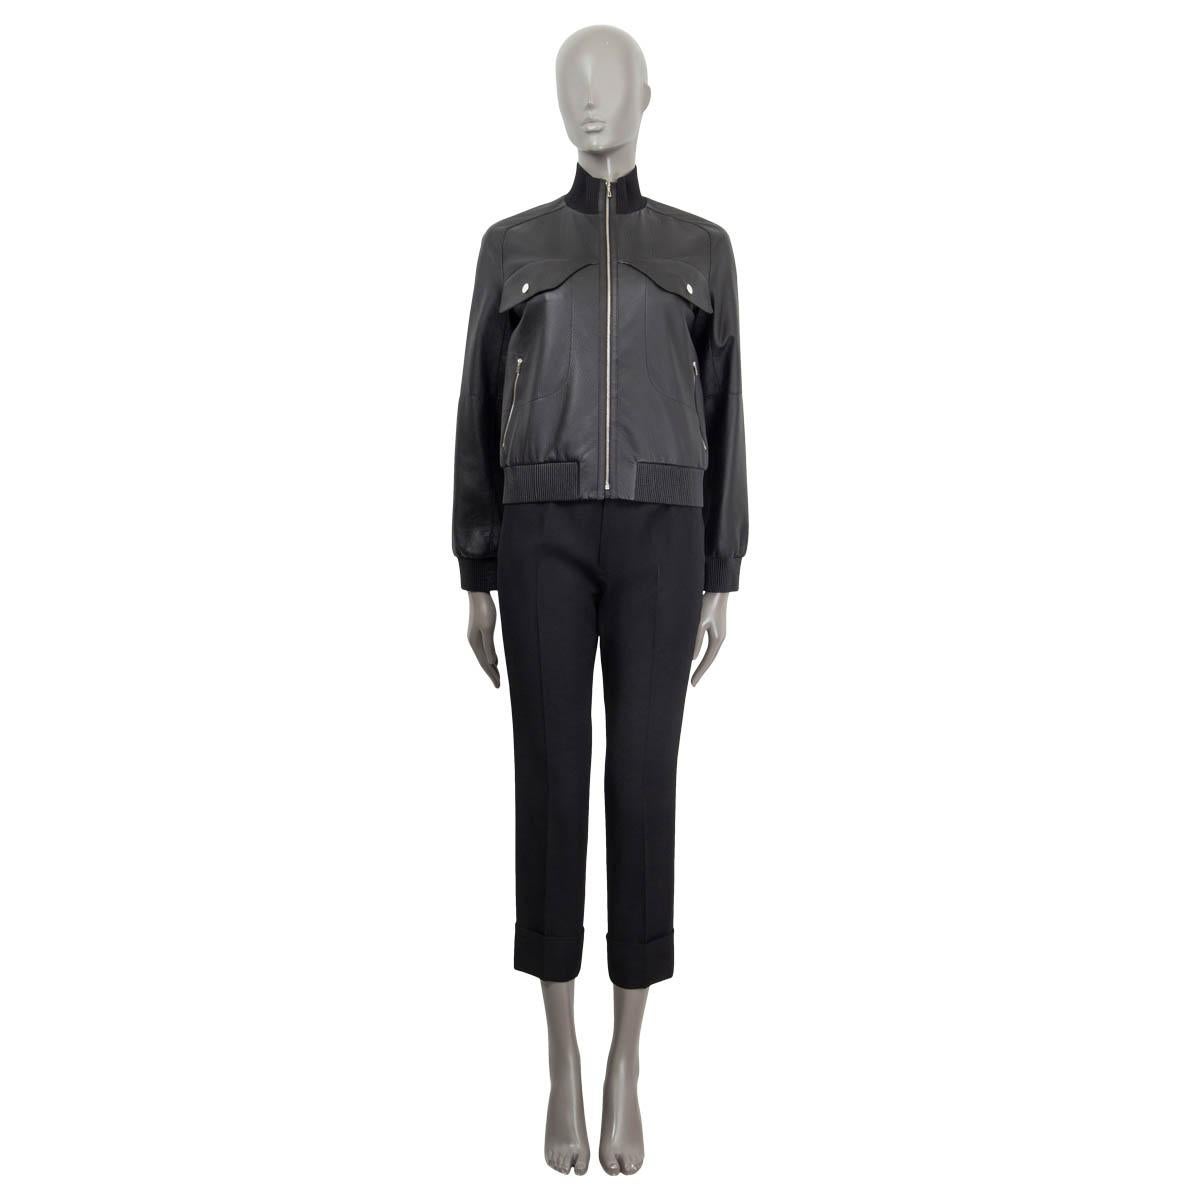 100% authentic Hermès Paris Bomber jacket in black deer skin leather (100%) with a ripped collar in black silk (48%), cotton (36%), polyamide (15%) and polyurethane (1%). Double lined in navy viscose (65%) and silk (35%). Opens with a silver colored